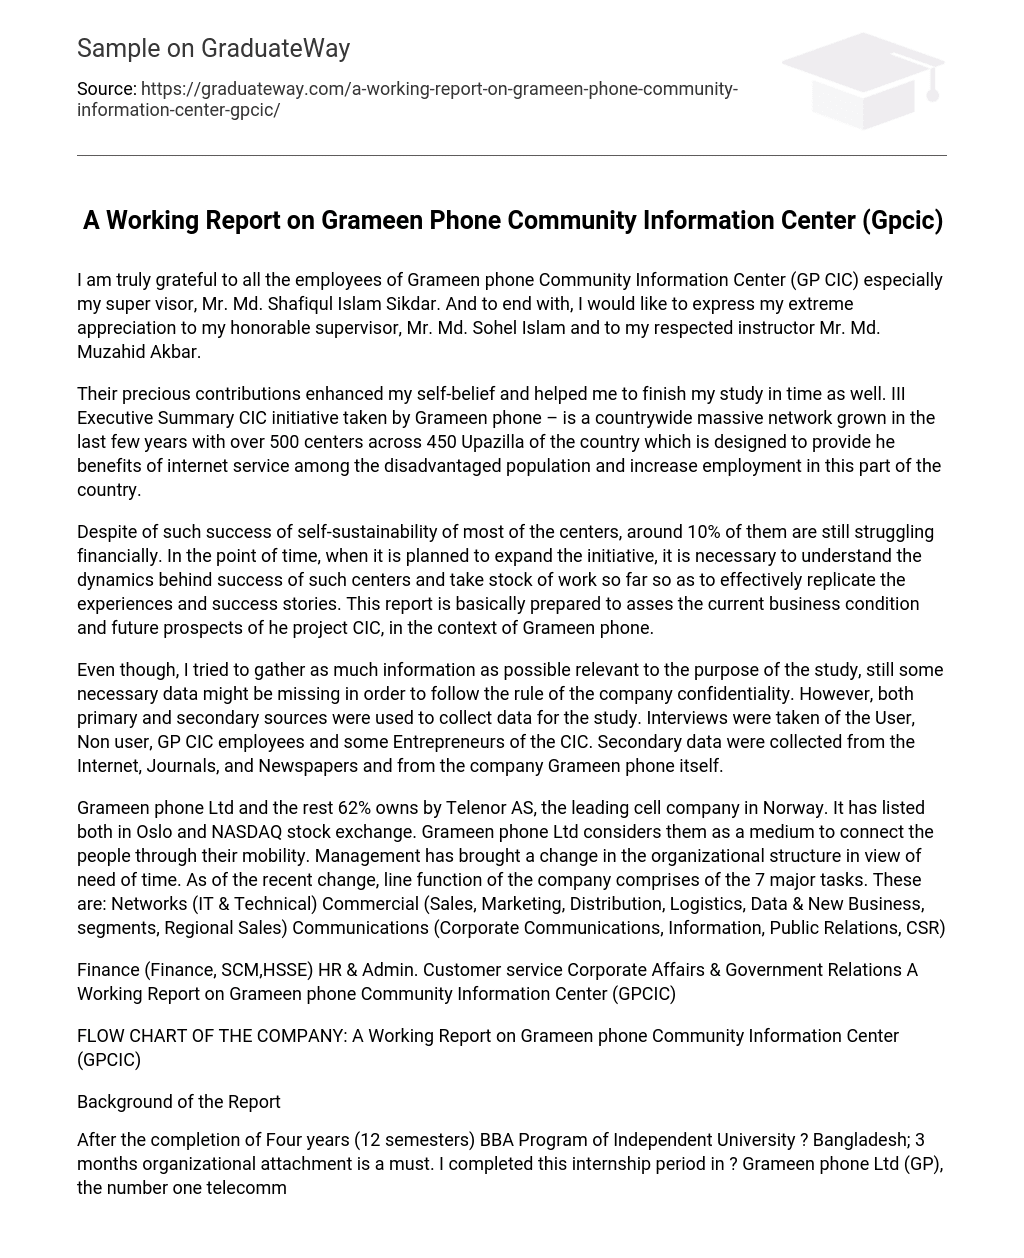 A Working Report on Grameen Phone Community Information Center (Gpcic)